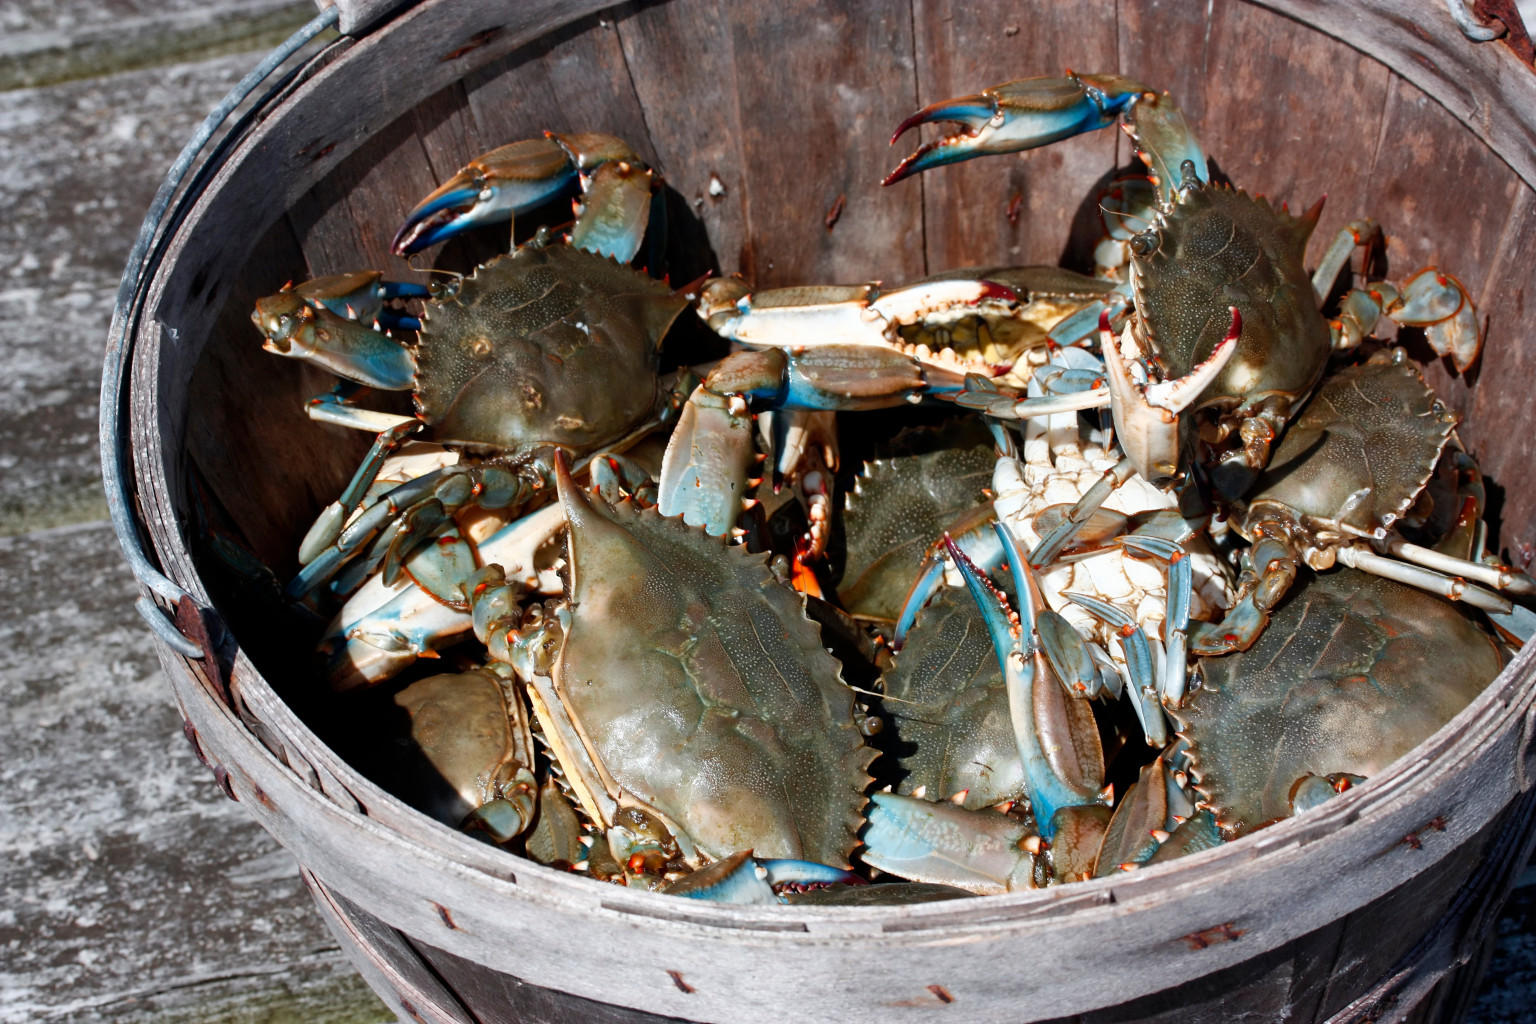 Crabs, Crabs, Crabs: Where To Feast On Chesapeake Bay's Finest In D.C